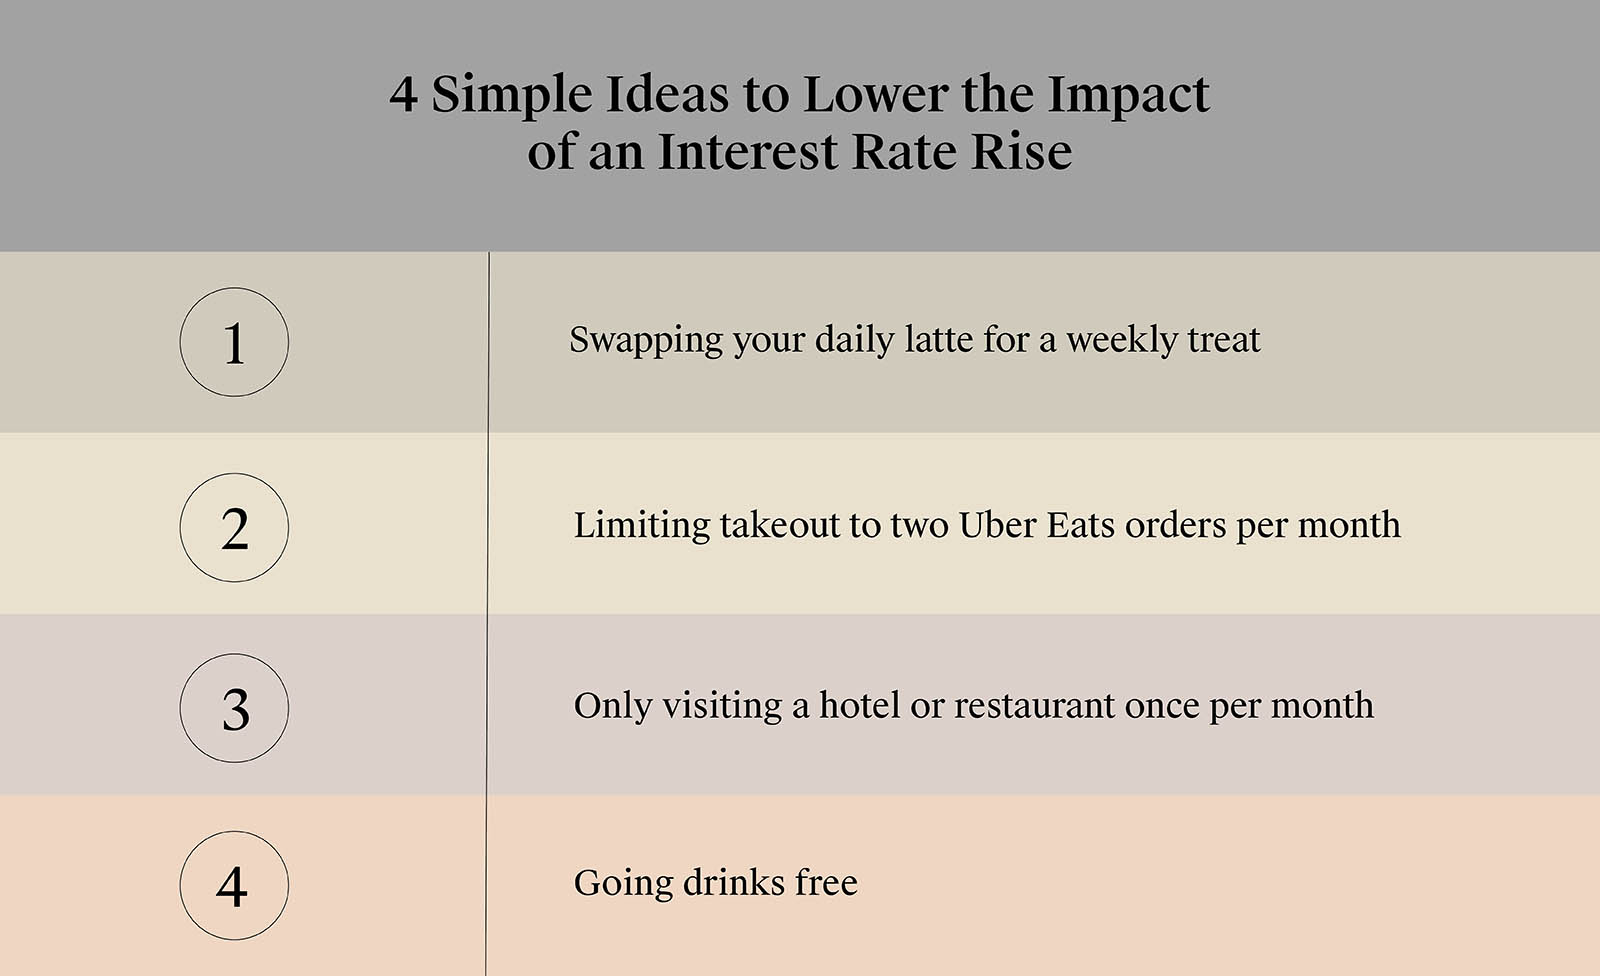 How Much Difference Does an Interest Rate Rise Make?